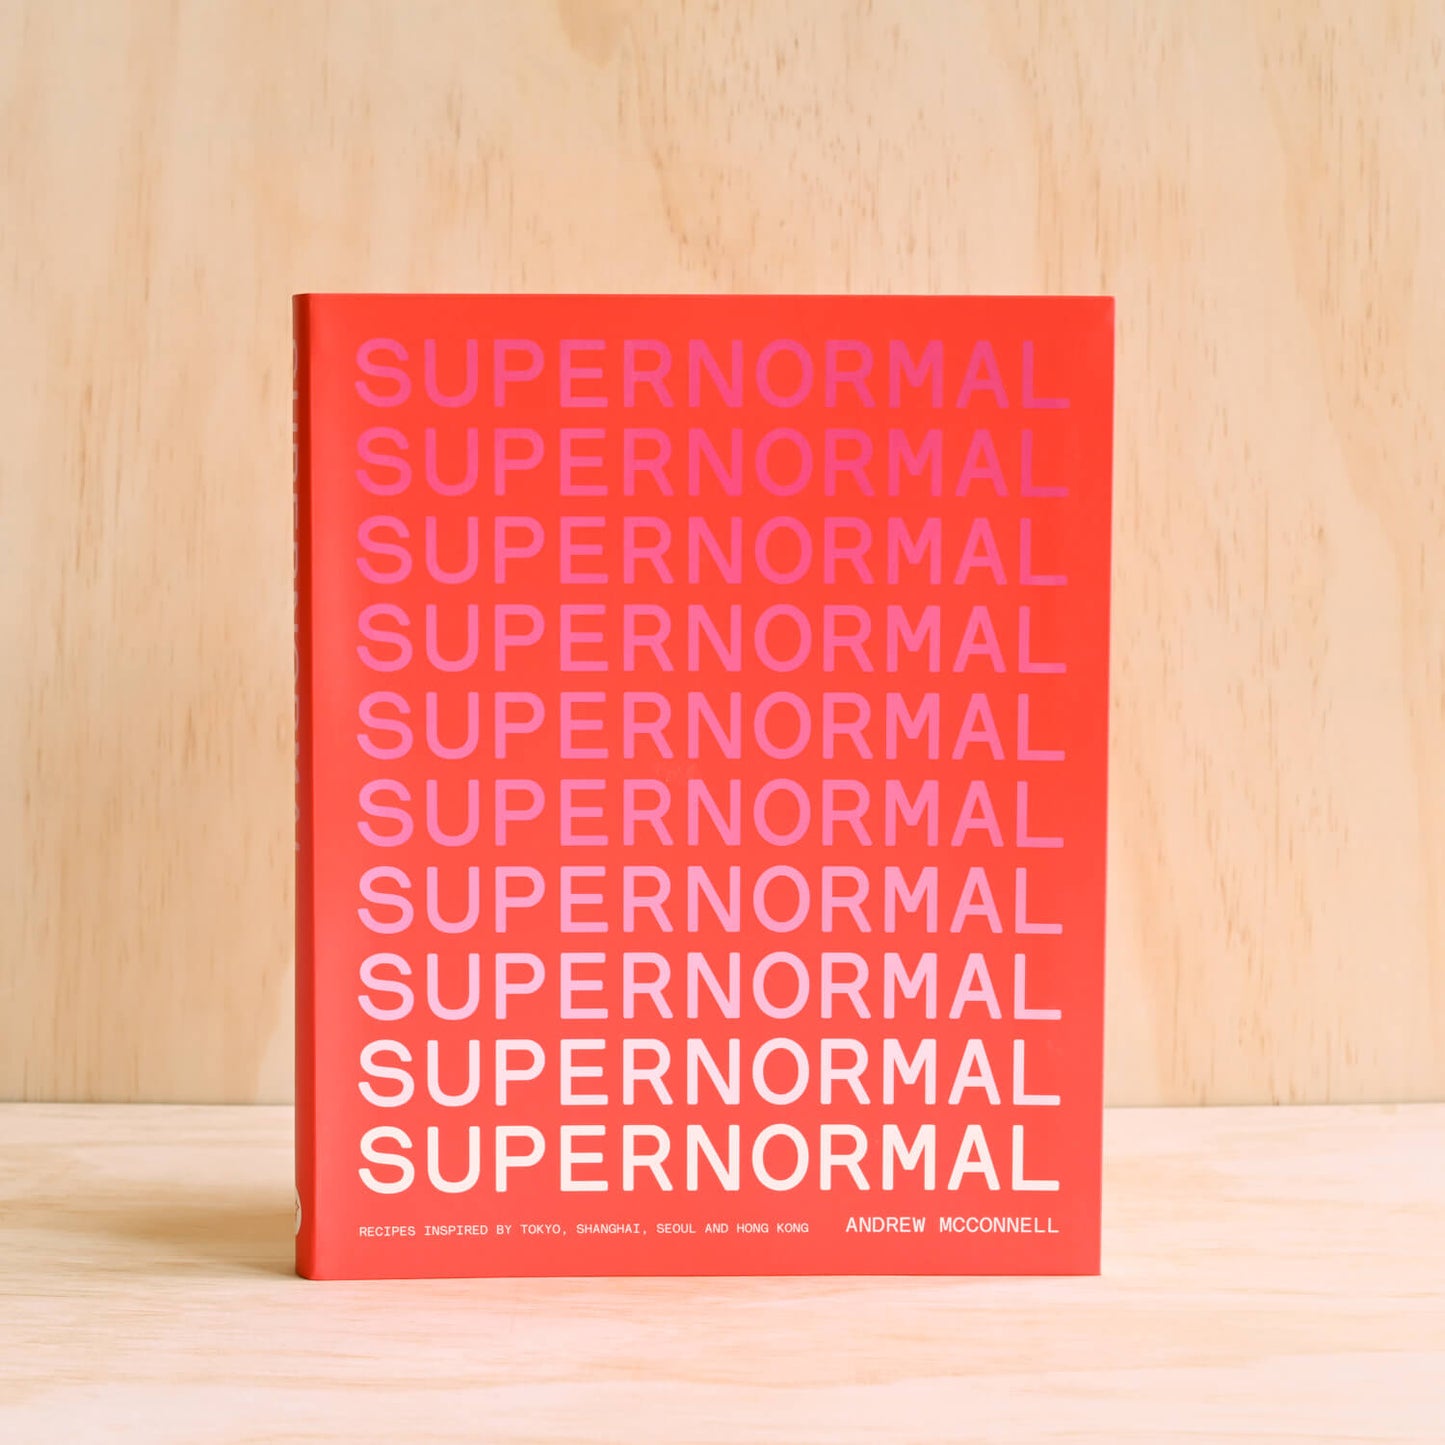 The Supernormal Cookbook, by Andrew McConnell